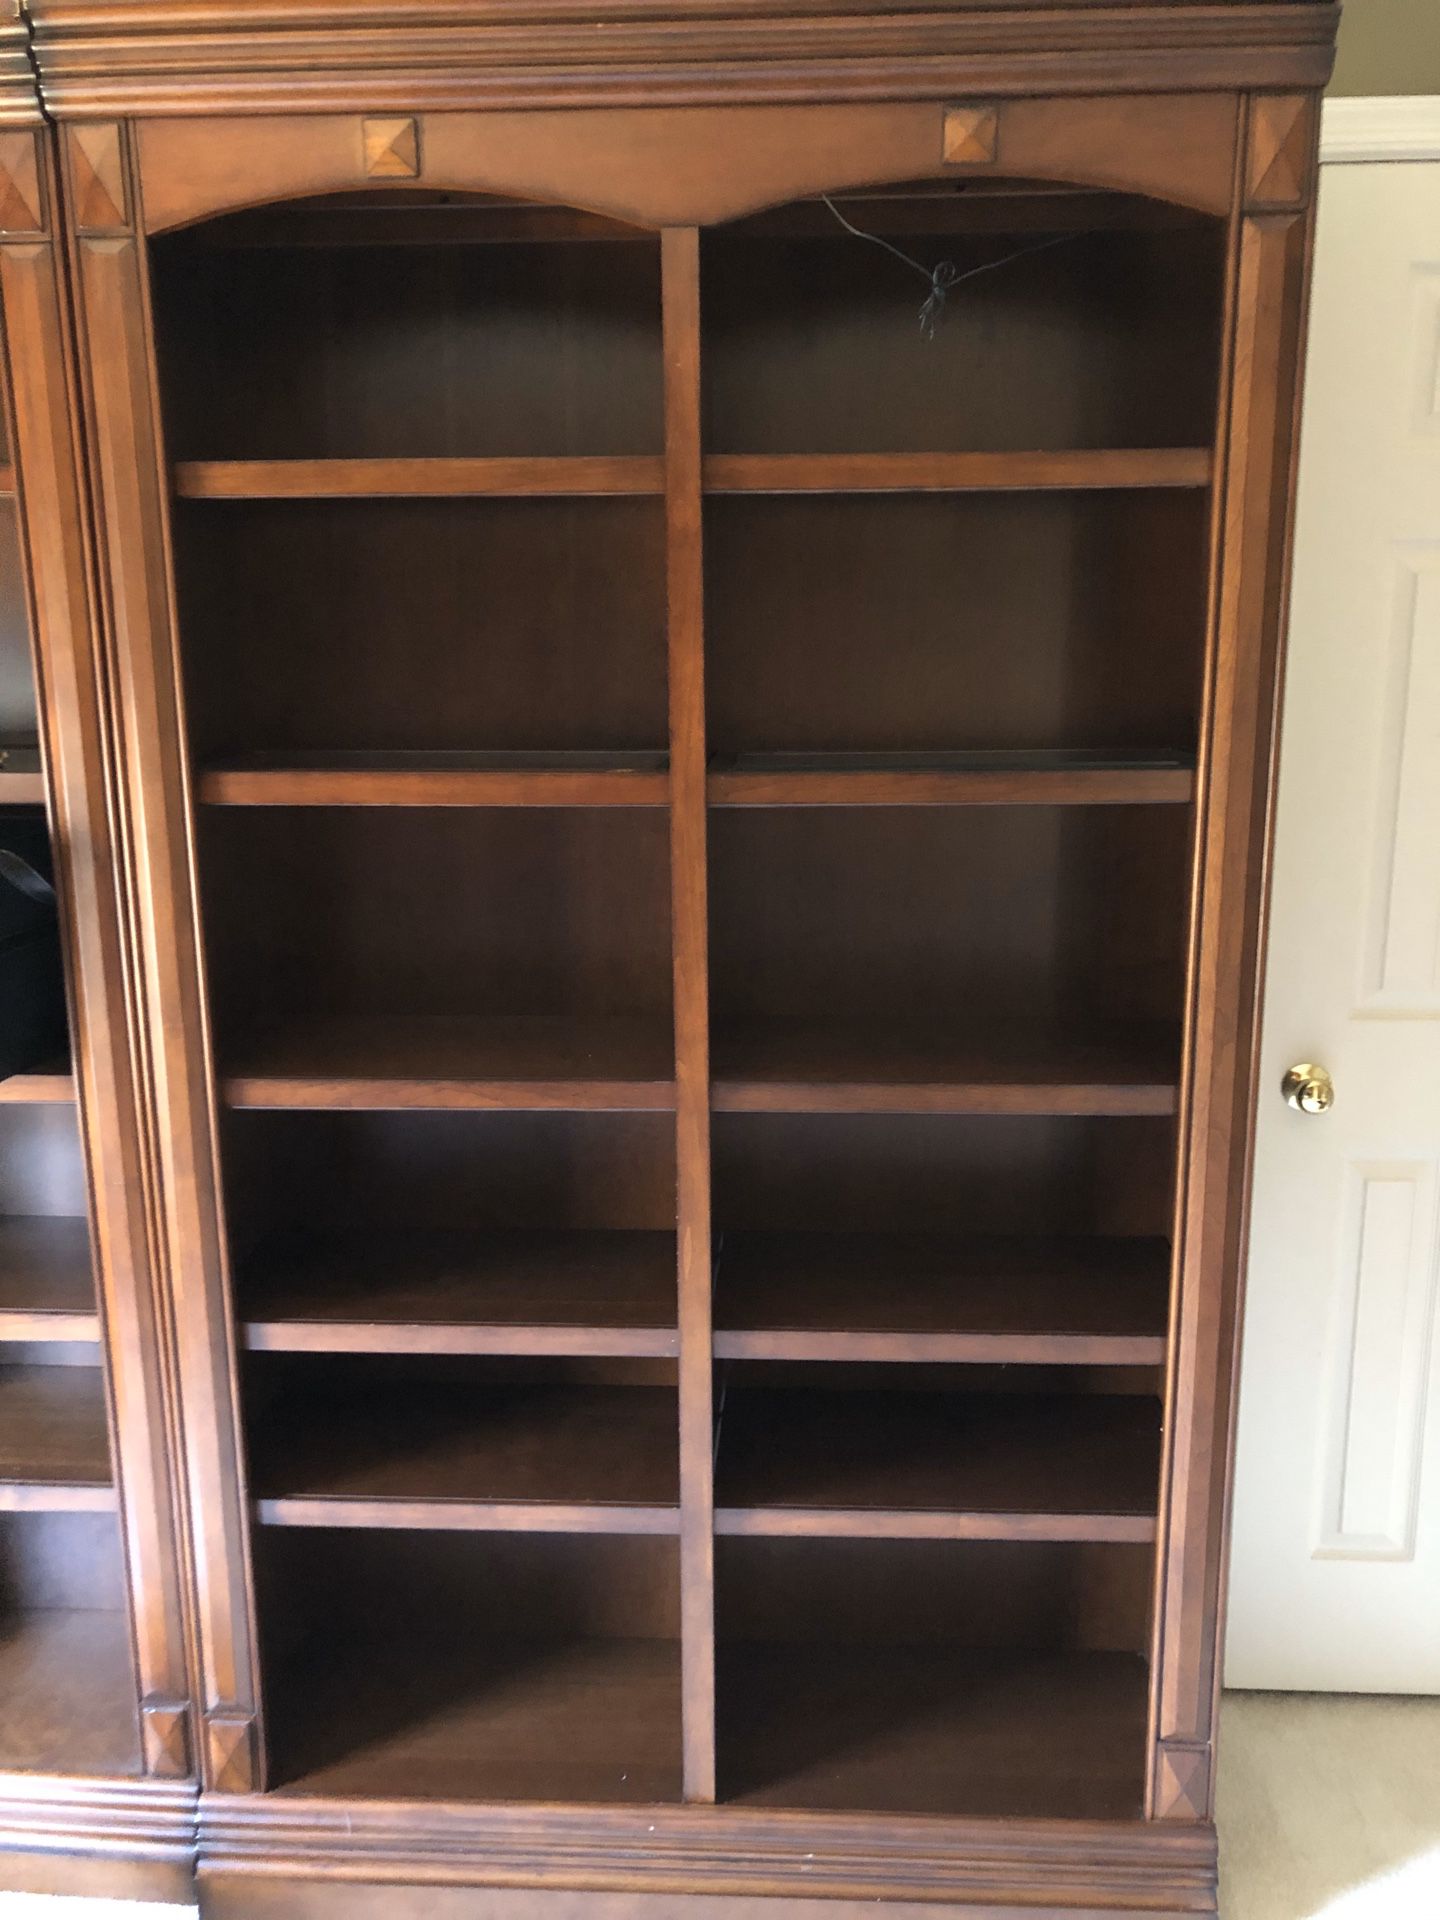 Cherry bookcases with top shelf lighting